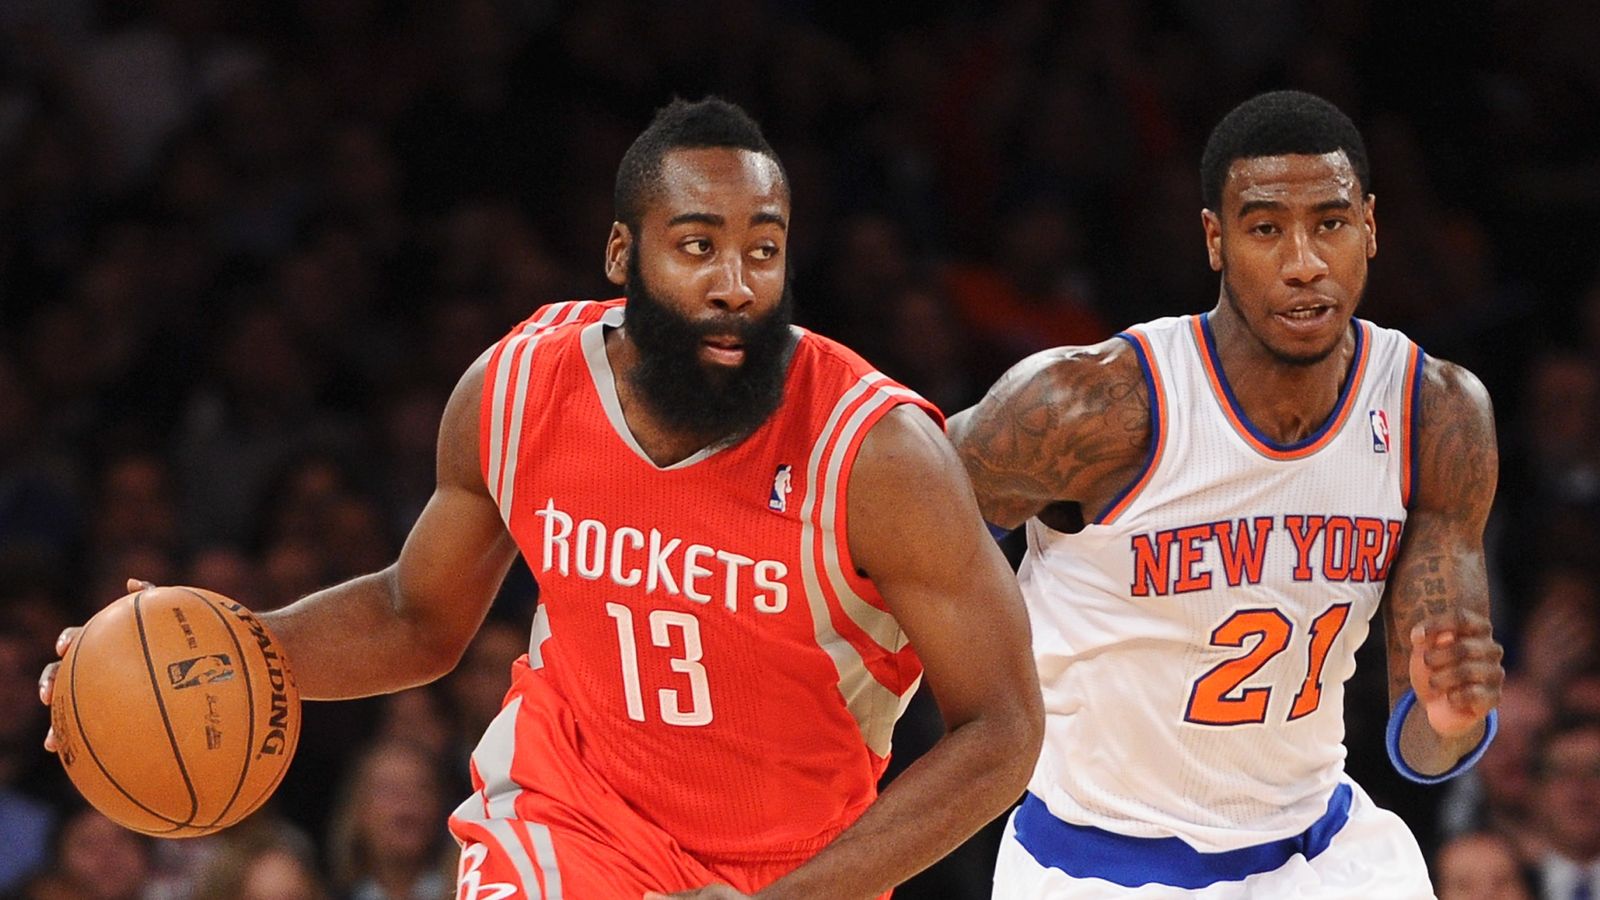 NBA: Houston Rockets inflict more misery on the New York Knicks | Basketball News ...1600 x 900